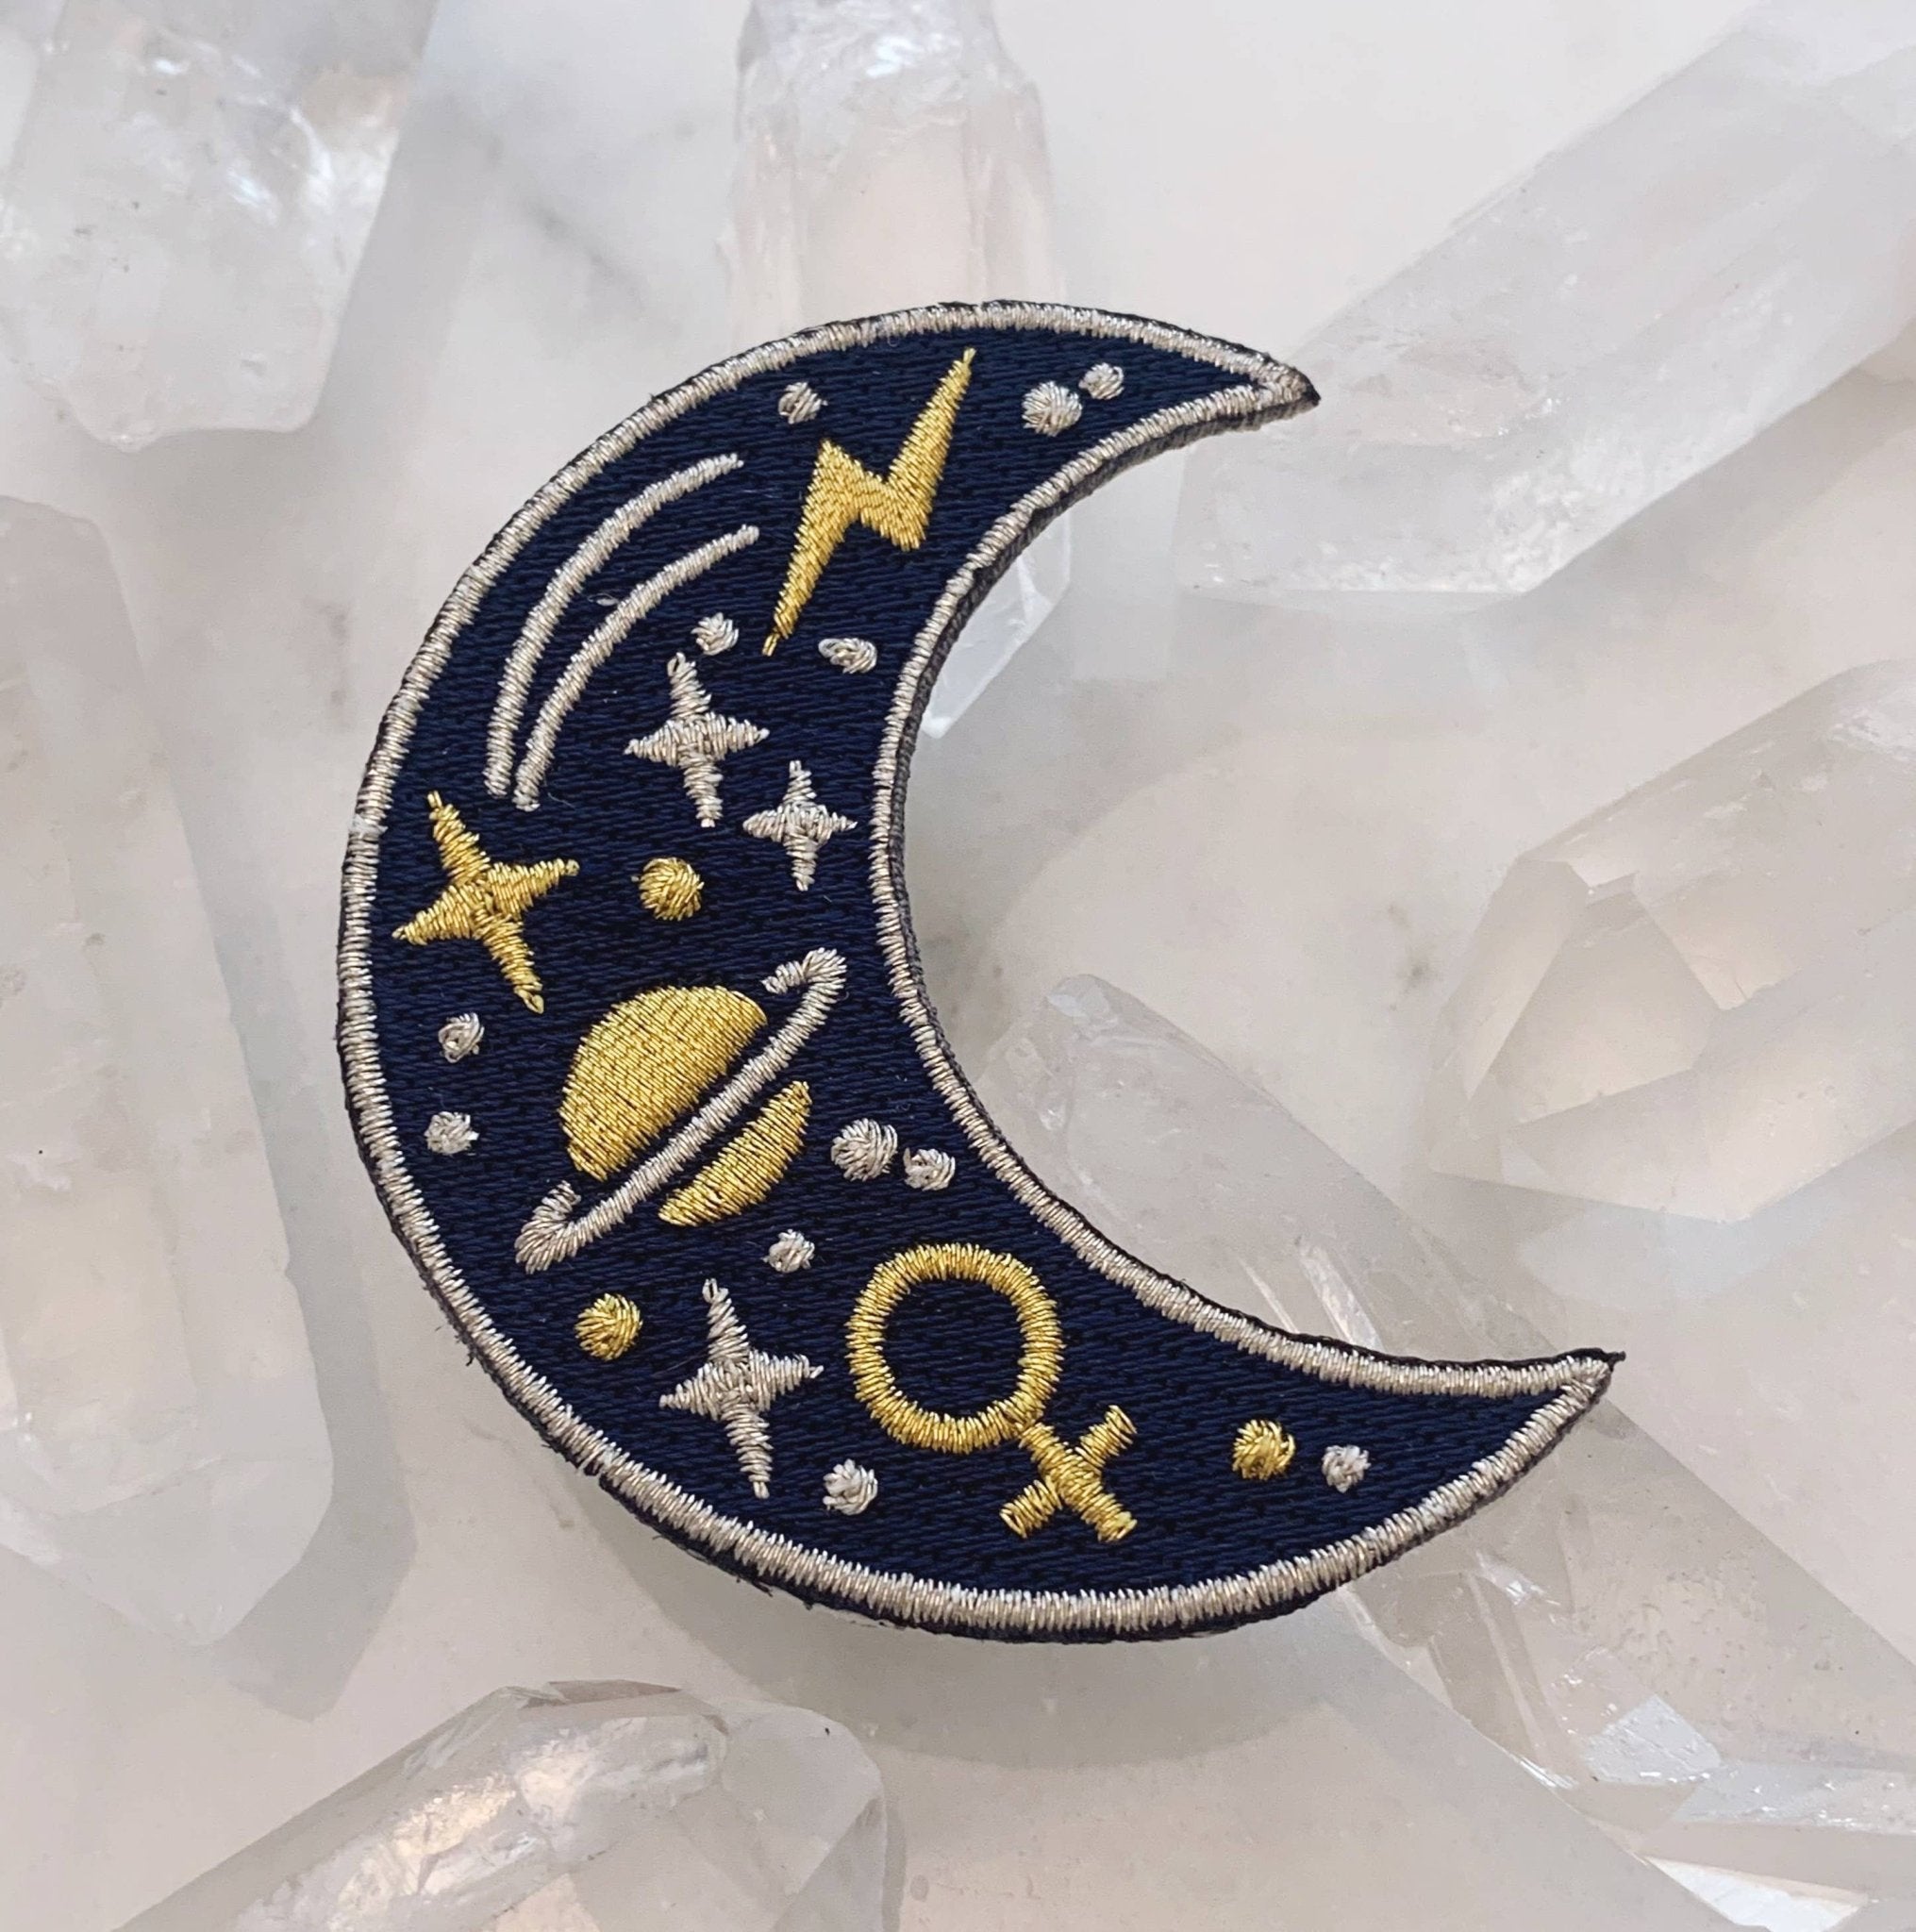 Cosmic Moon Patch - Patch